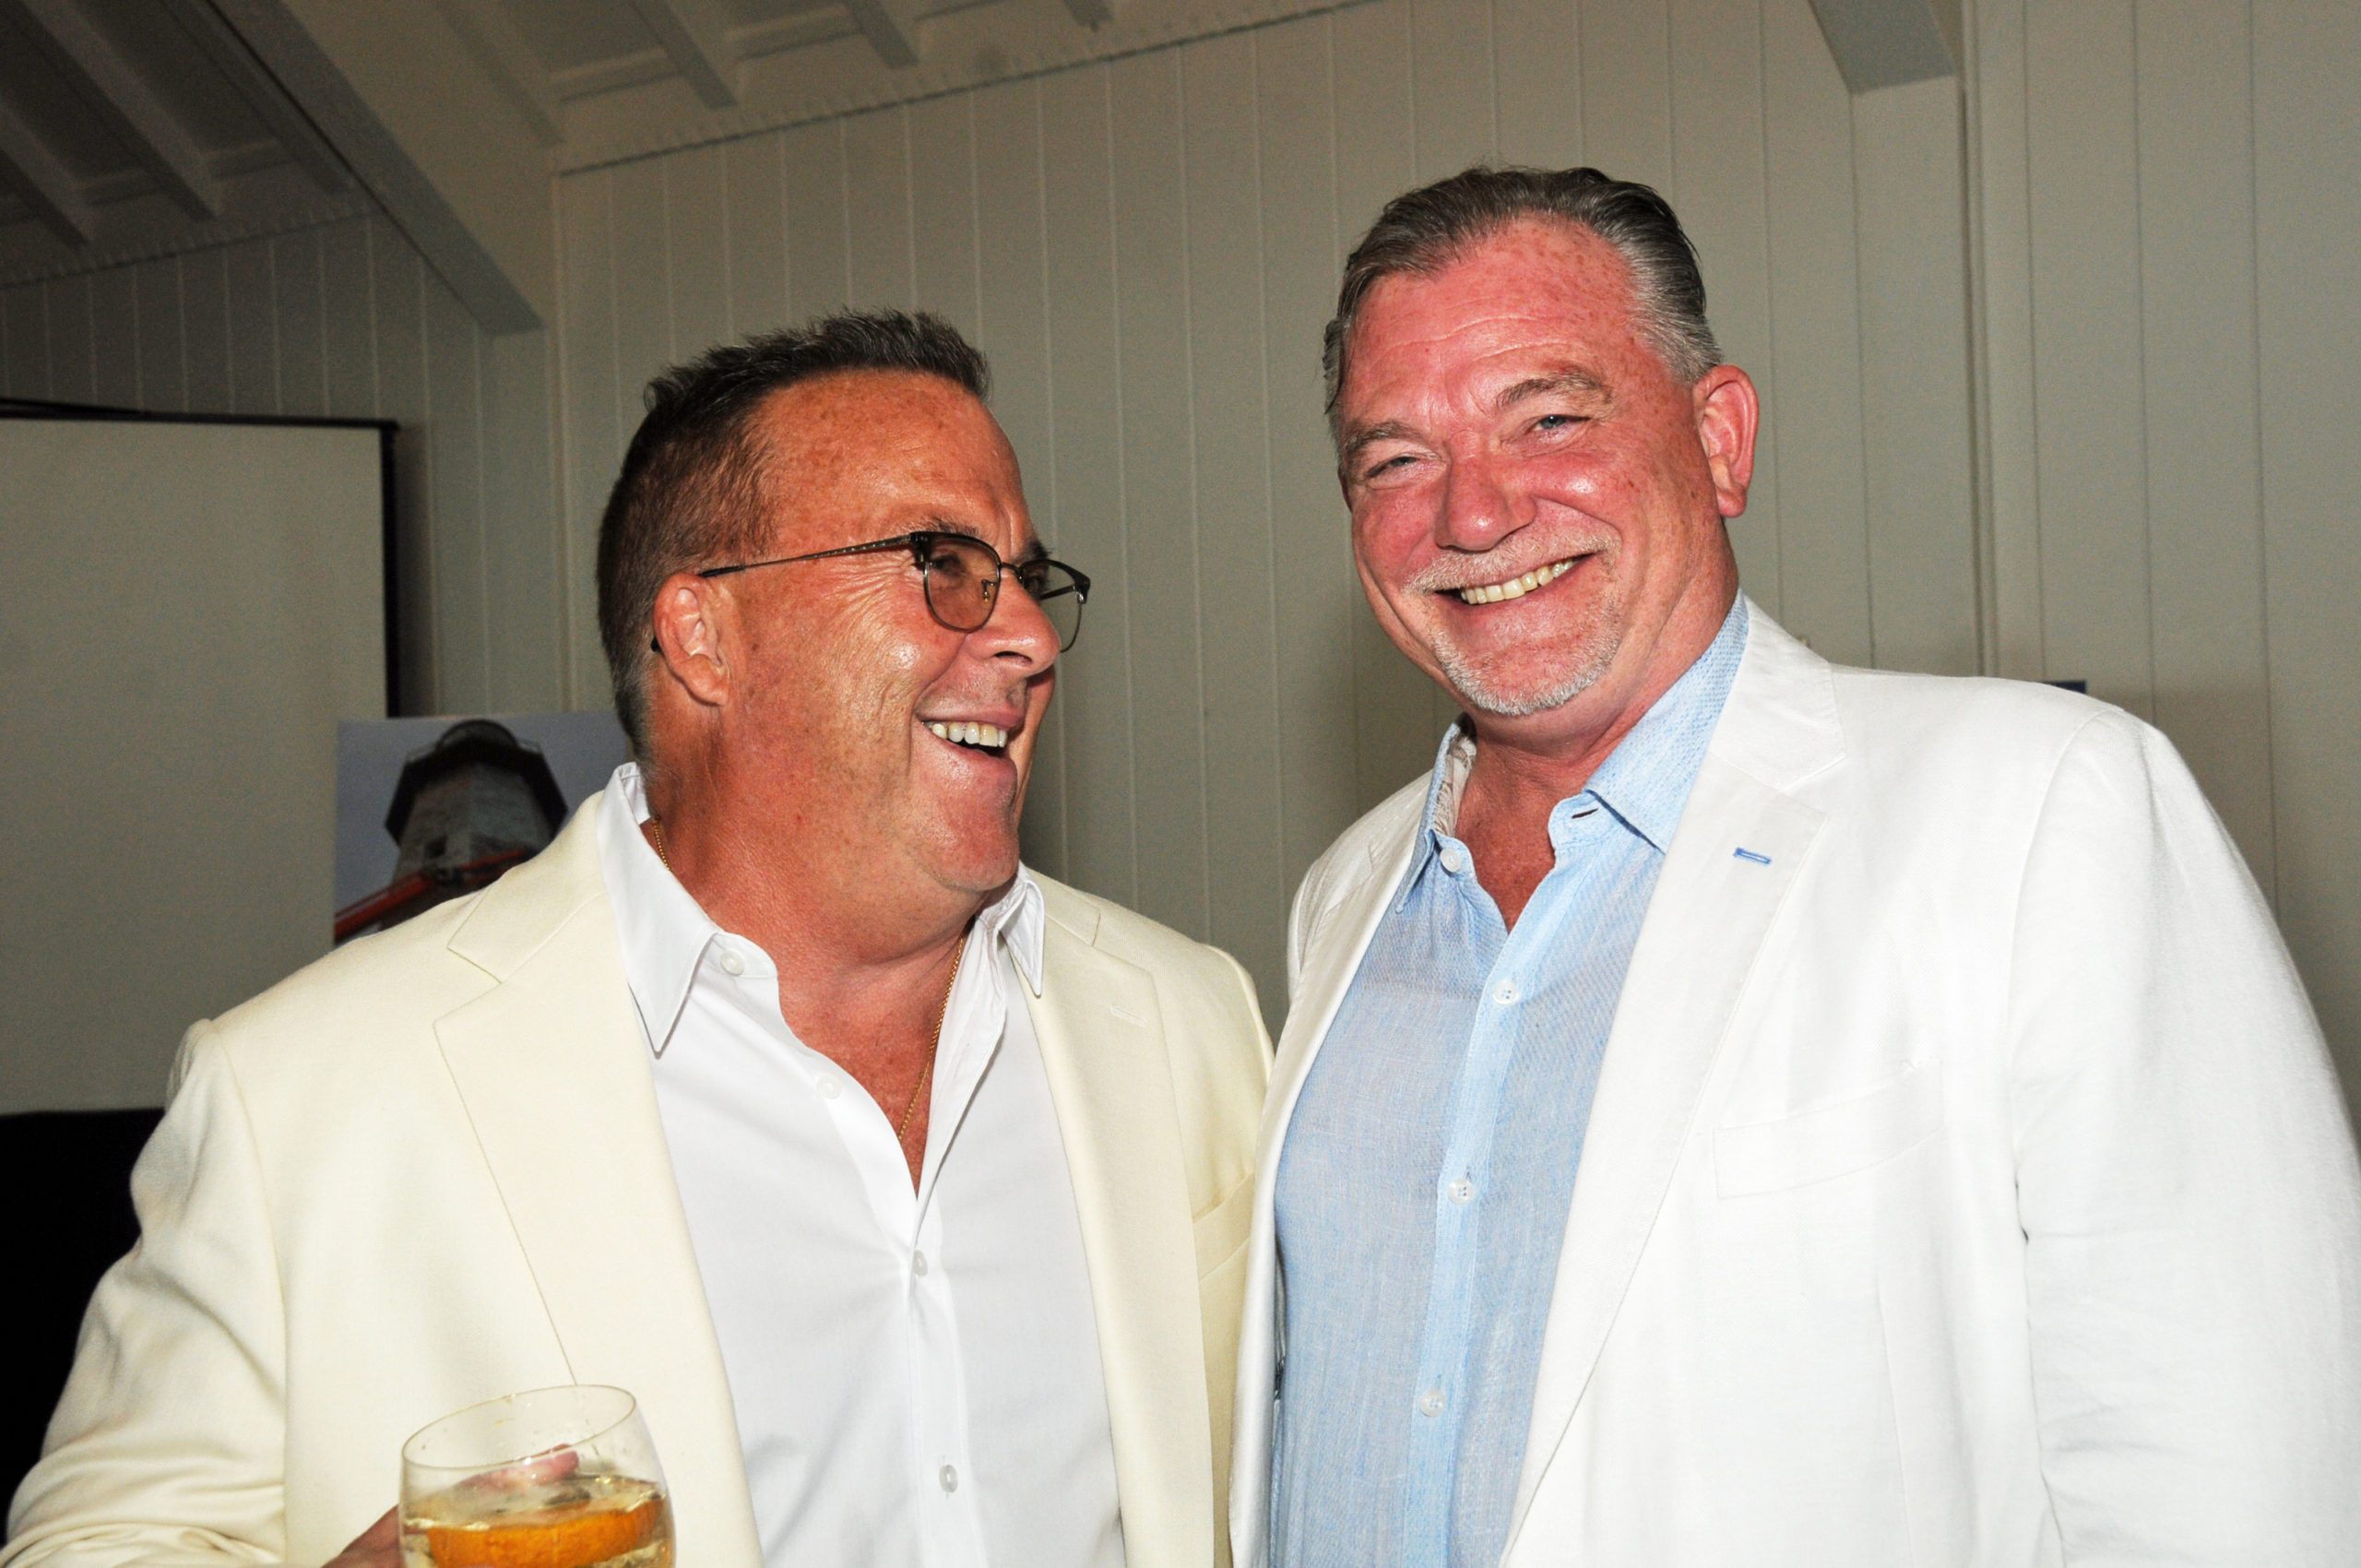 Robert McBride and Kevin O'Connor at the Montauk Historical Society's cocktail party on July 14 to launch a public capital campaign for the Montauk Point Lighthouse restoration.  Work on restoring the tower began in 2019, and is scheduled to be completed by next year.     RICHARD LEWIN